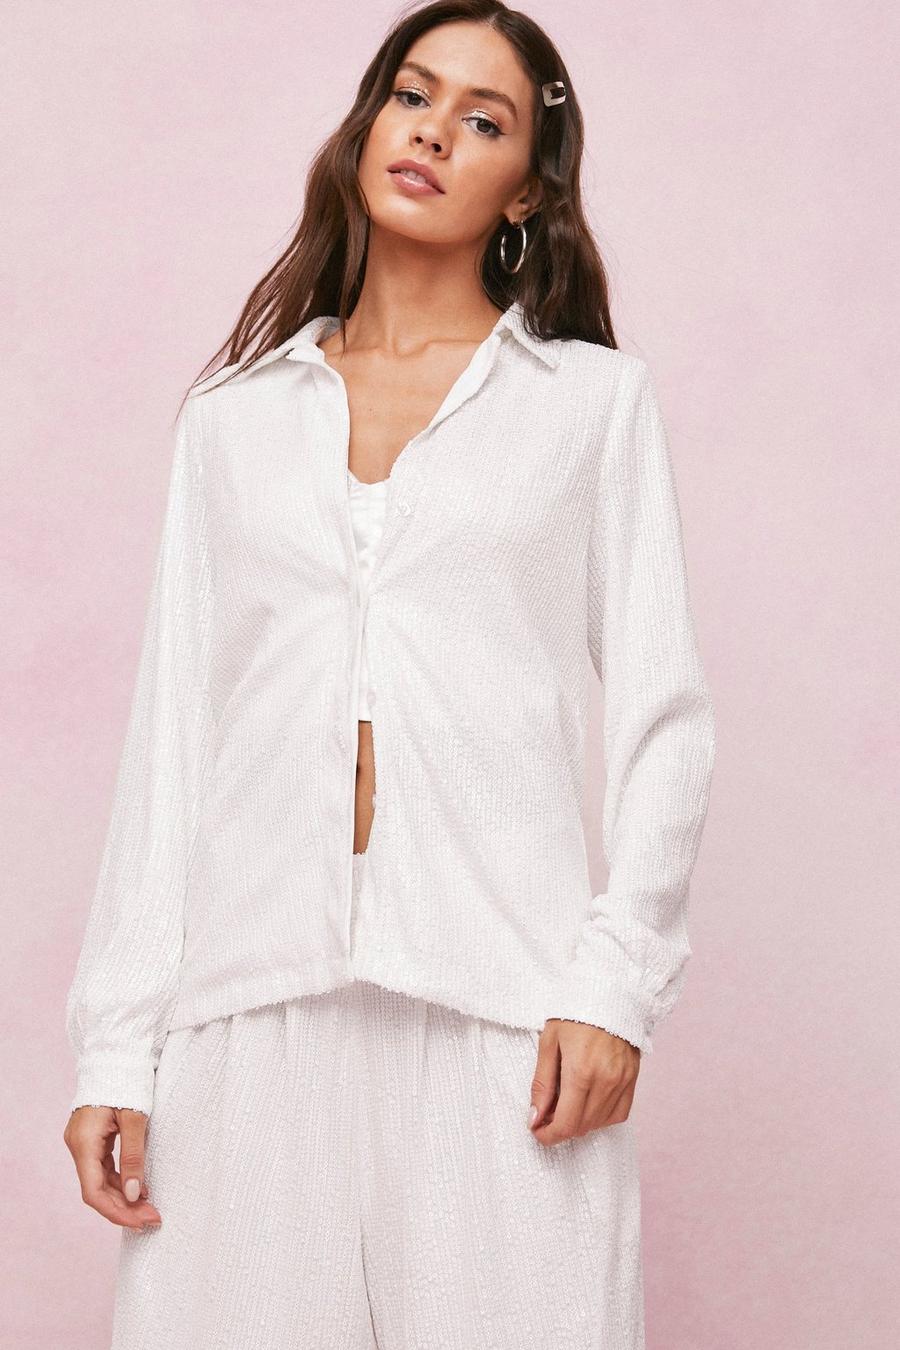 White Sequin Button Up Shirt